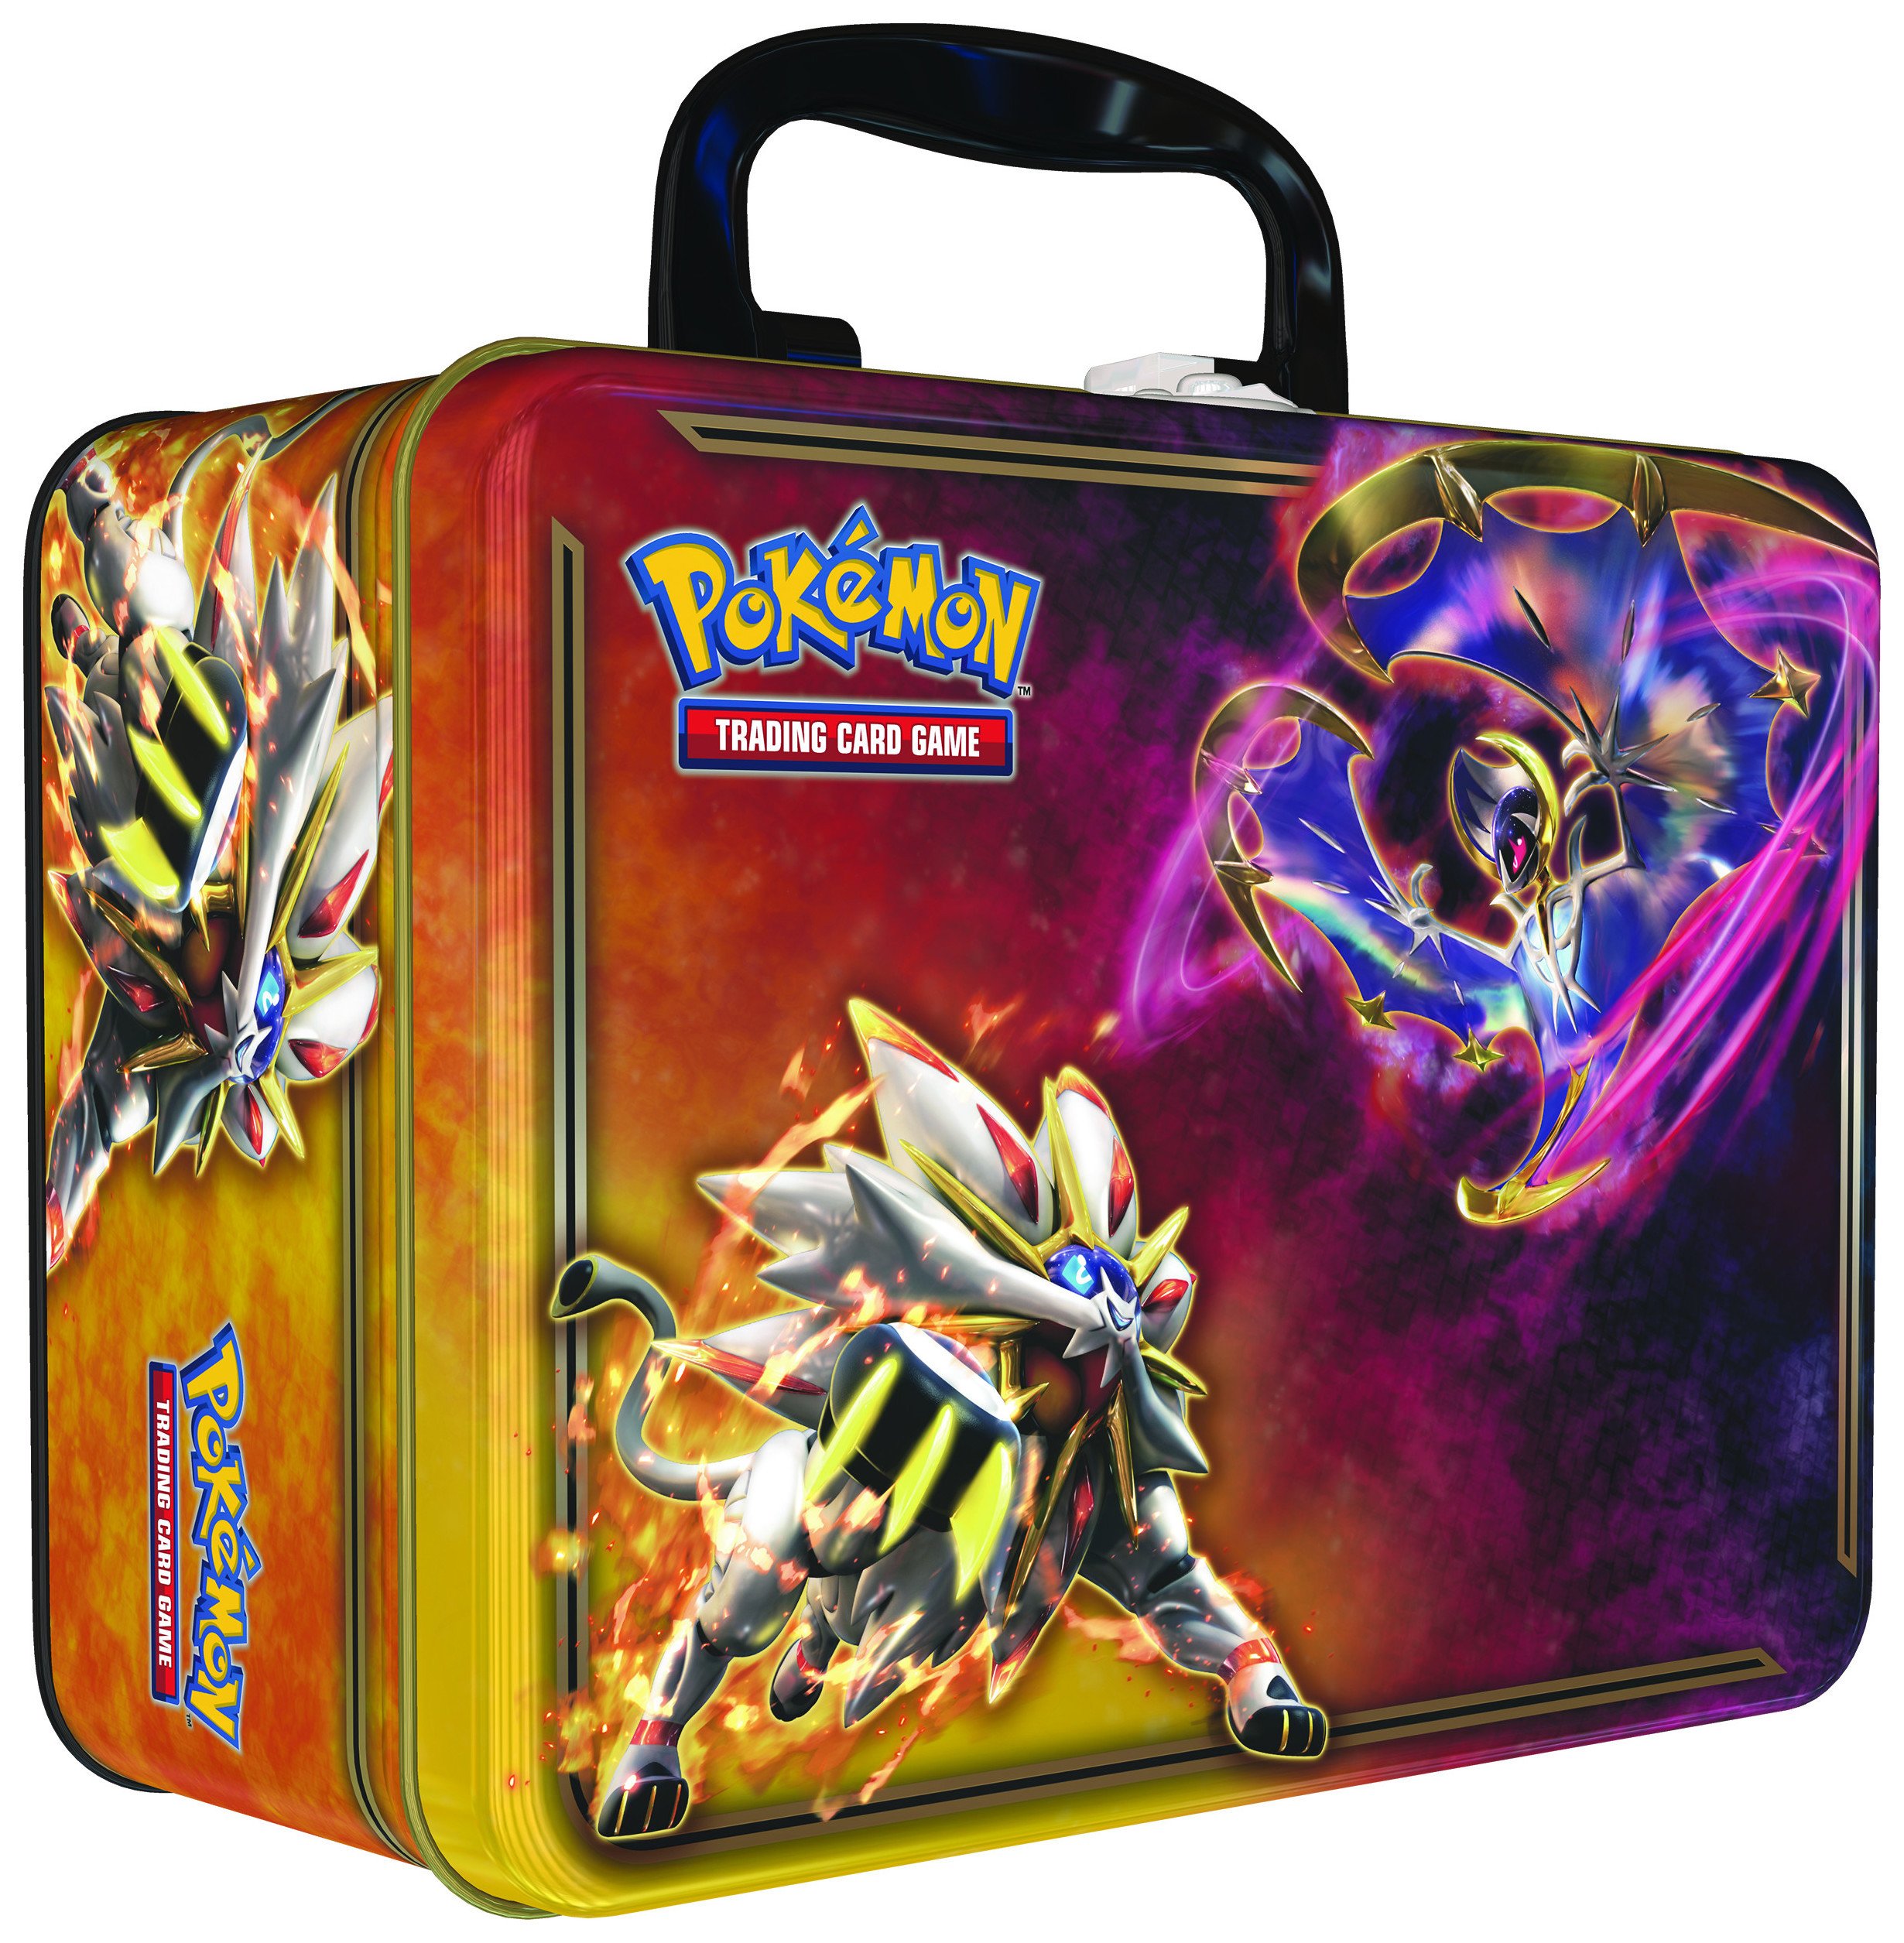 Pokemon TCG Spring 2017 Collector Chest. Review